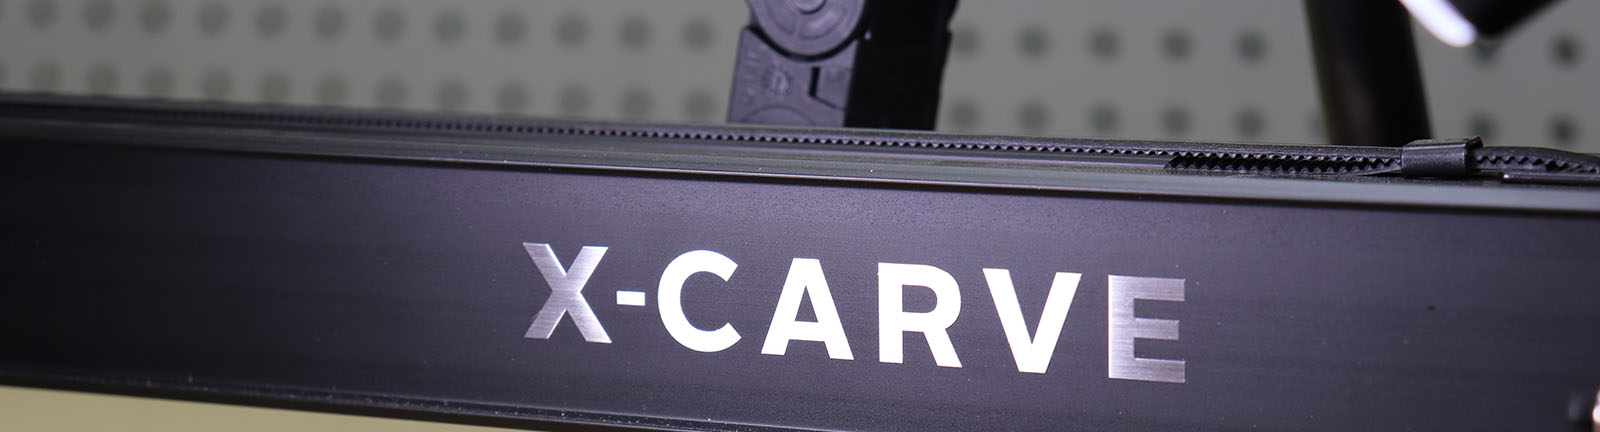 2017 NEW X-Carve From Inventables – Review and 1st Project